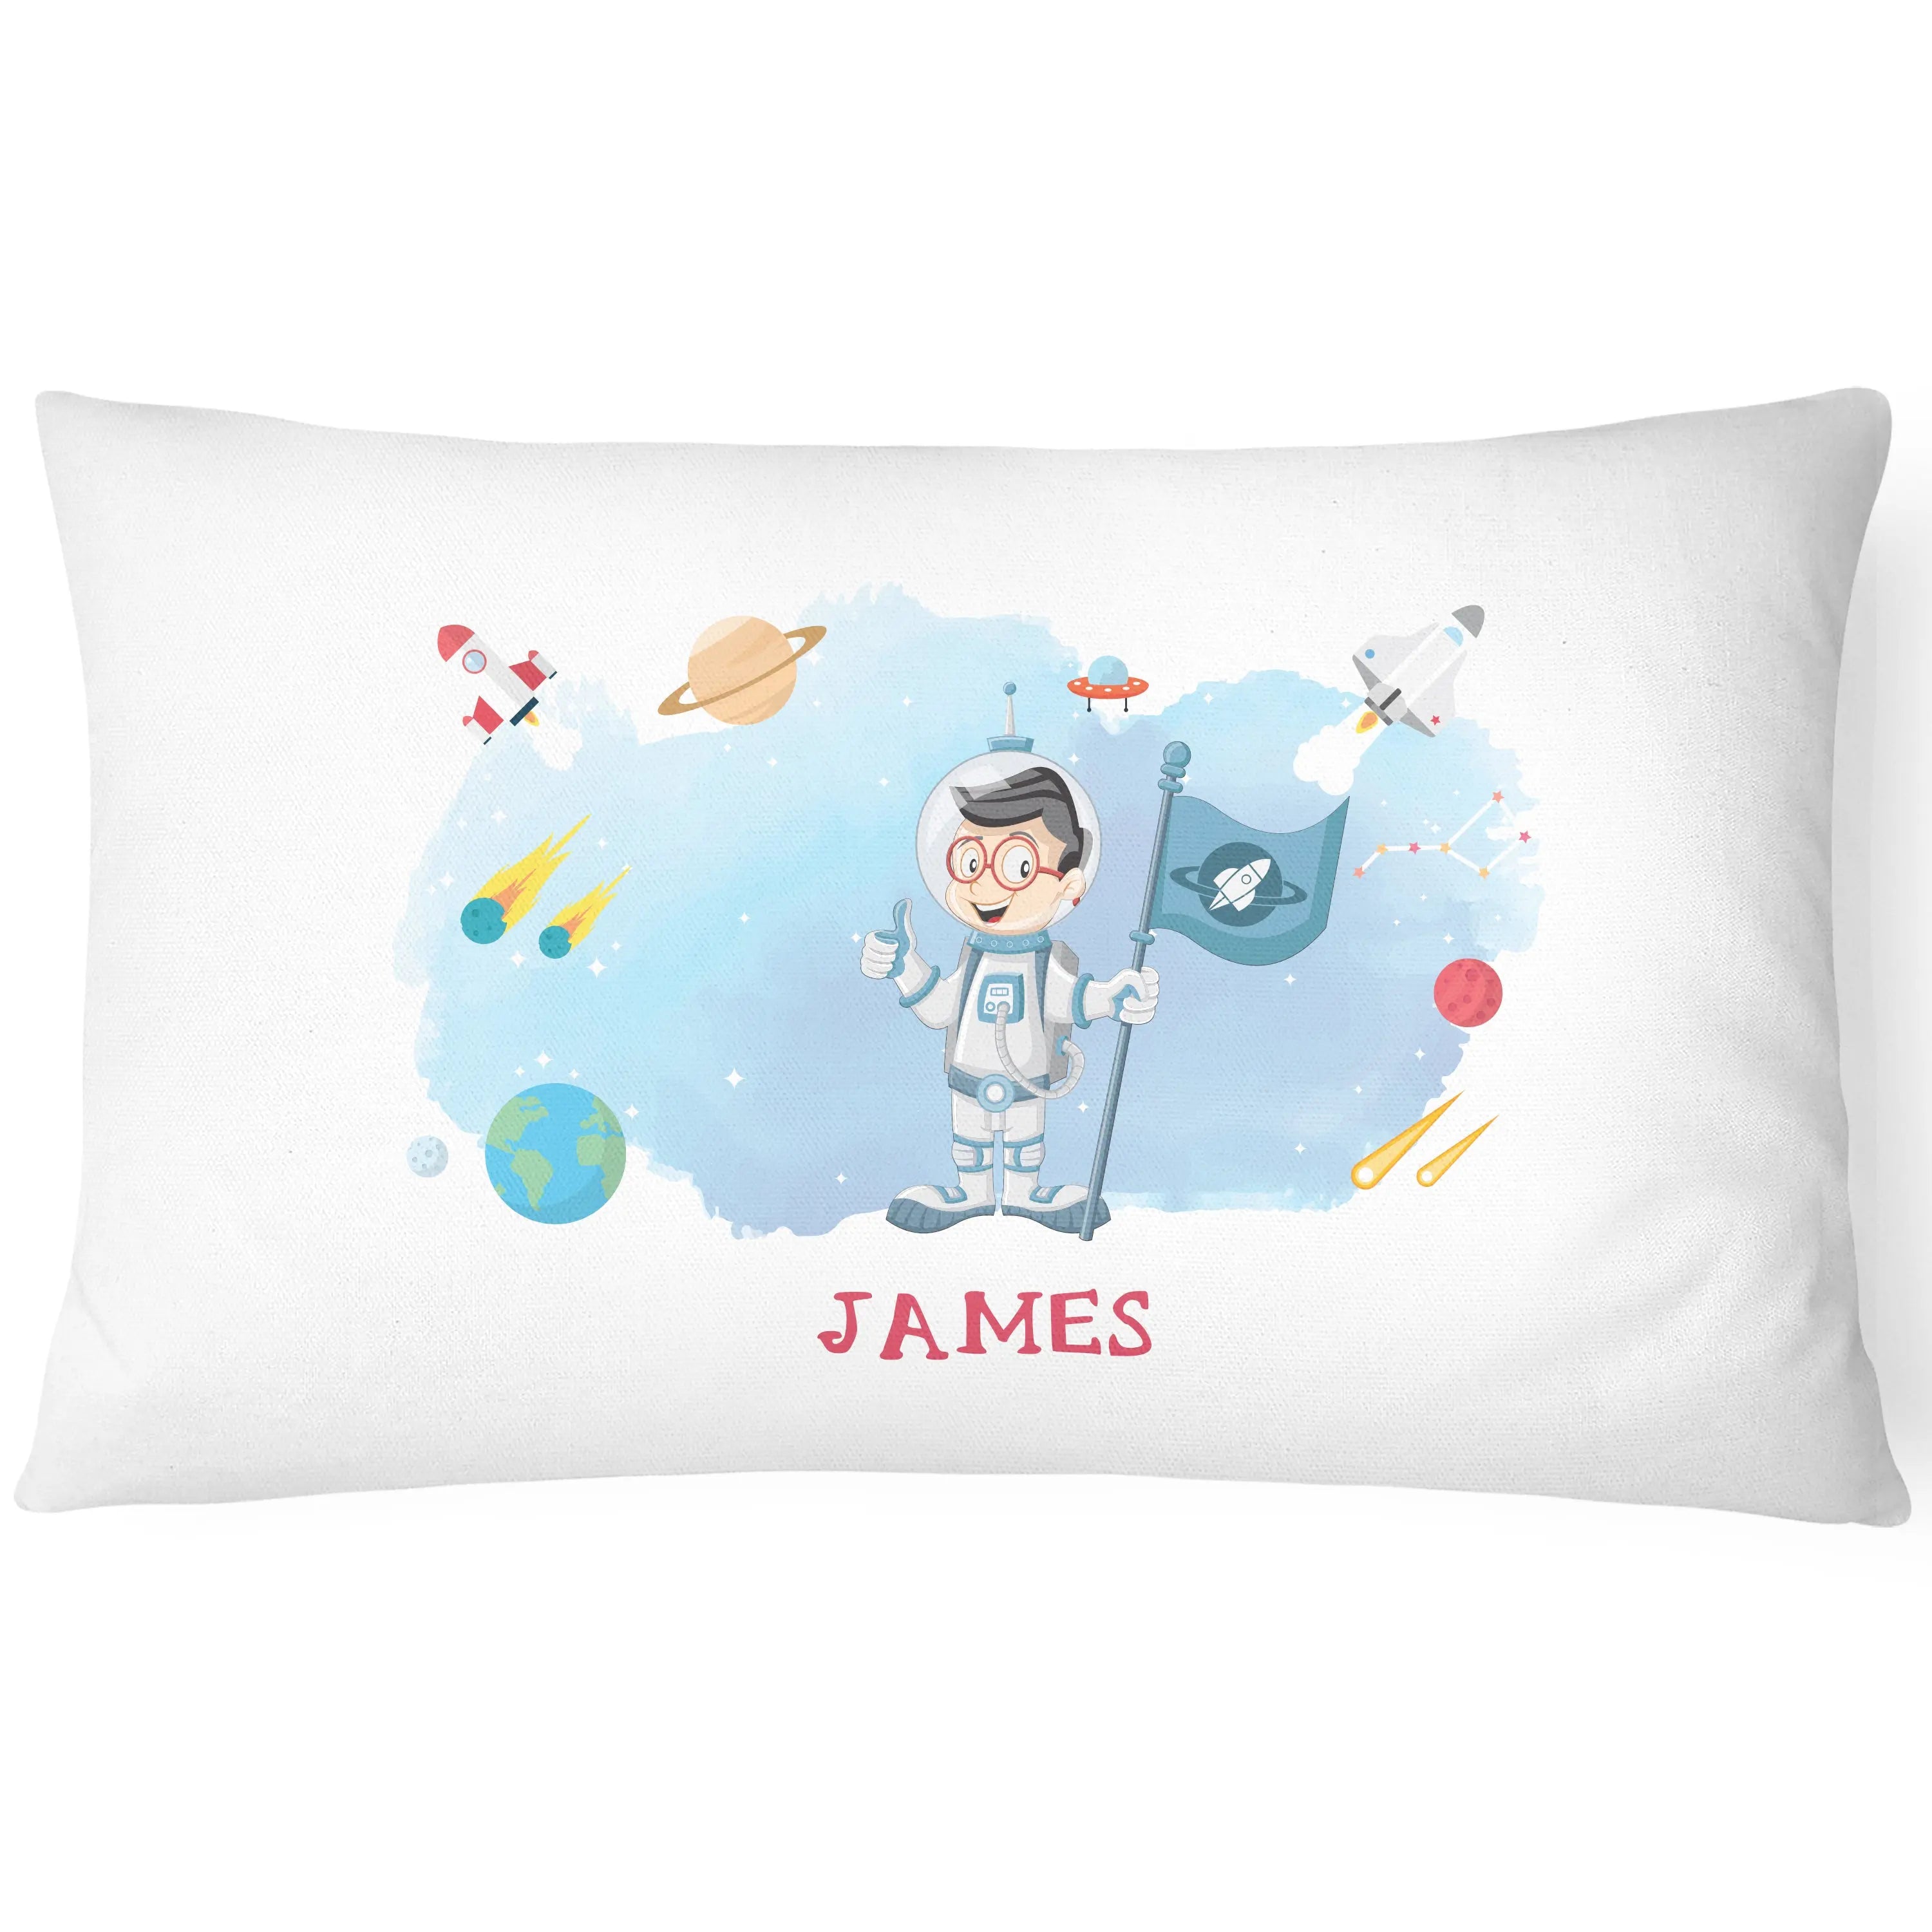 Space Pillowcase for Kids - Personalise With Any Name - Planted - CushionPop